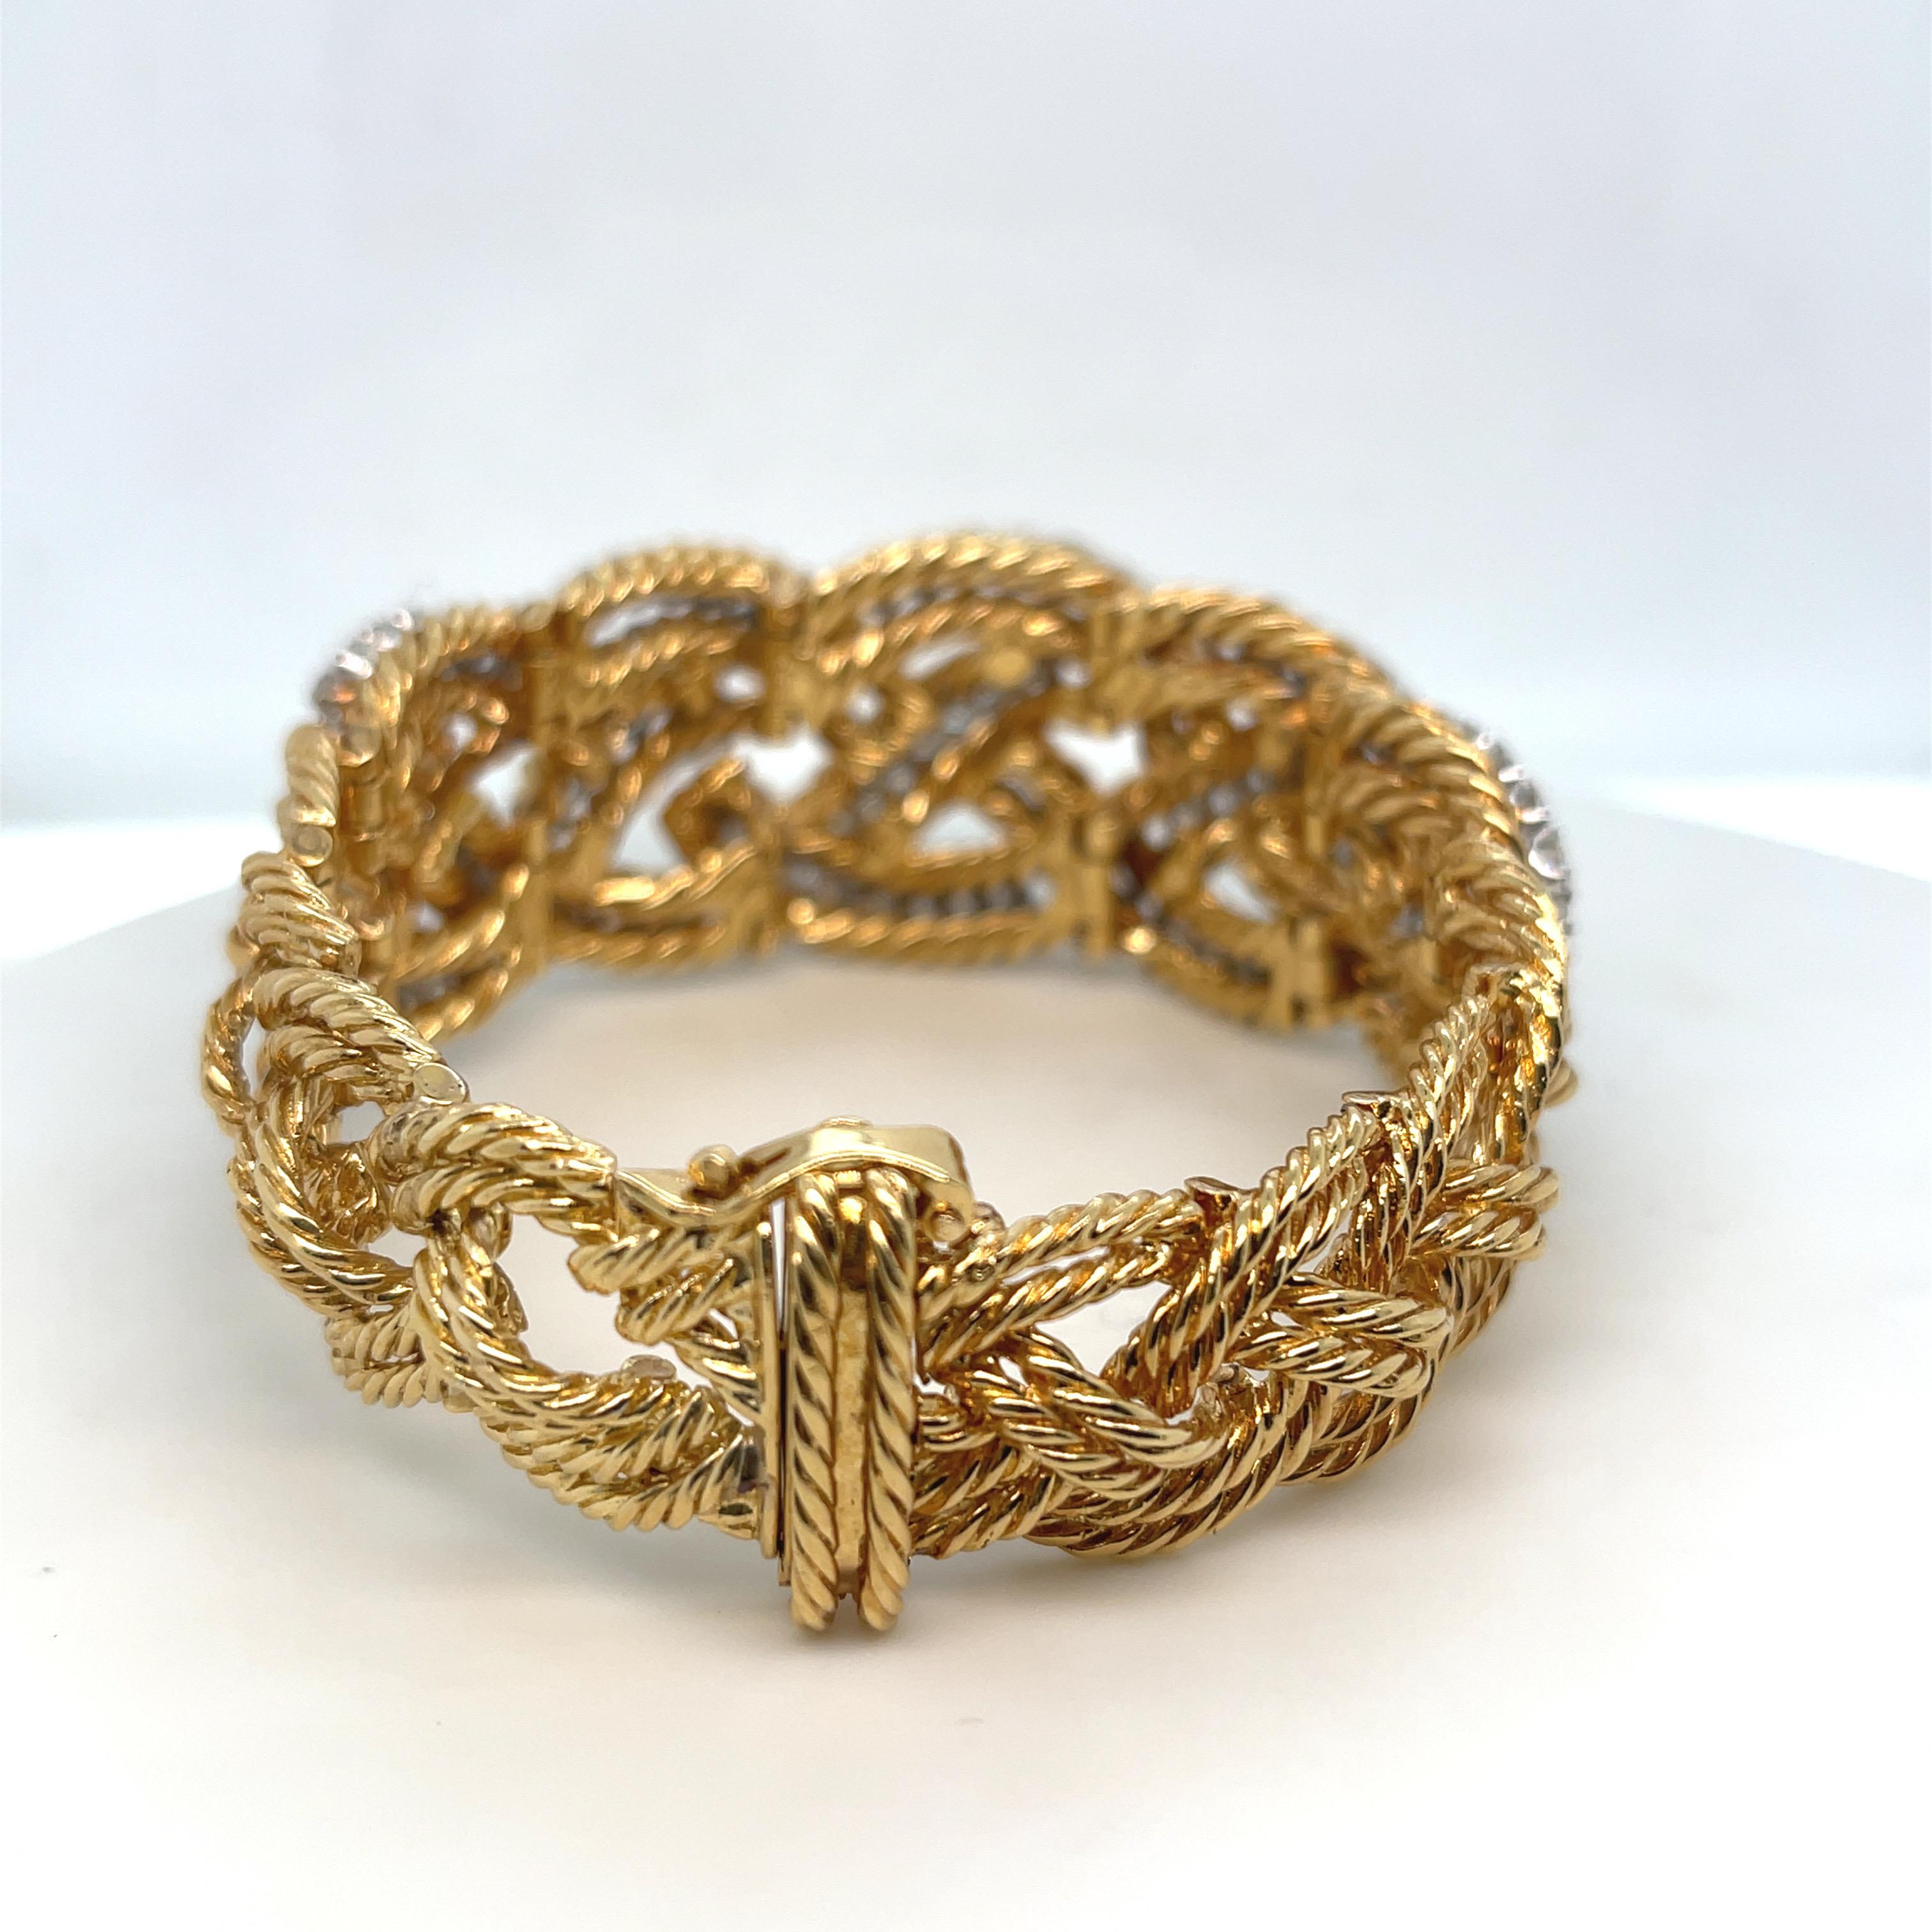 Issac Nussbaum 18k Yellow Gold Bracelet In New Condition For Sale In New York, NY